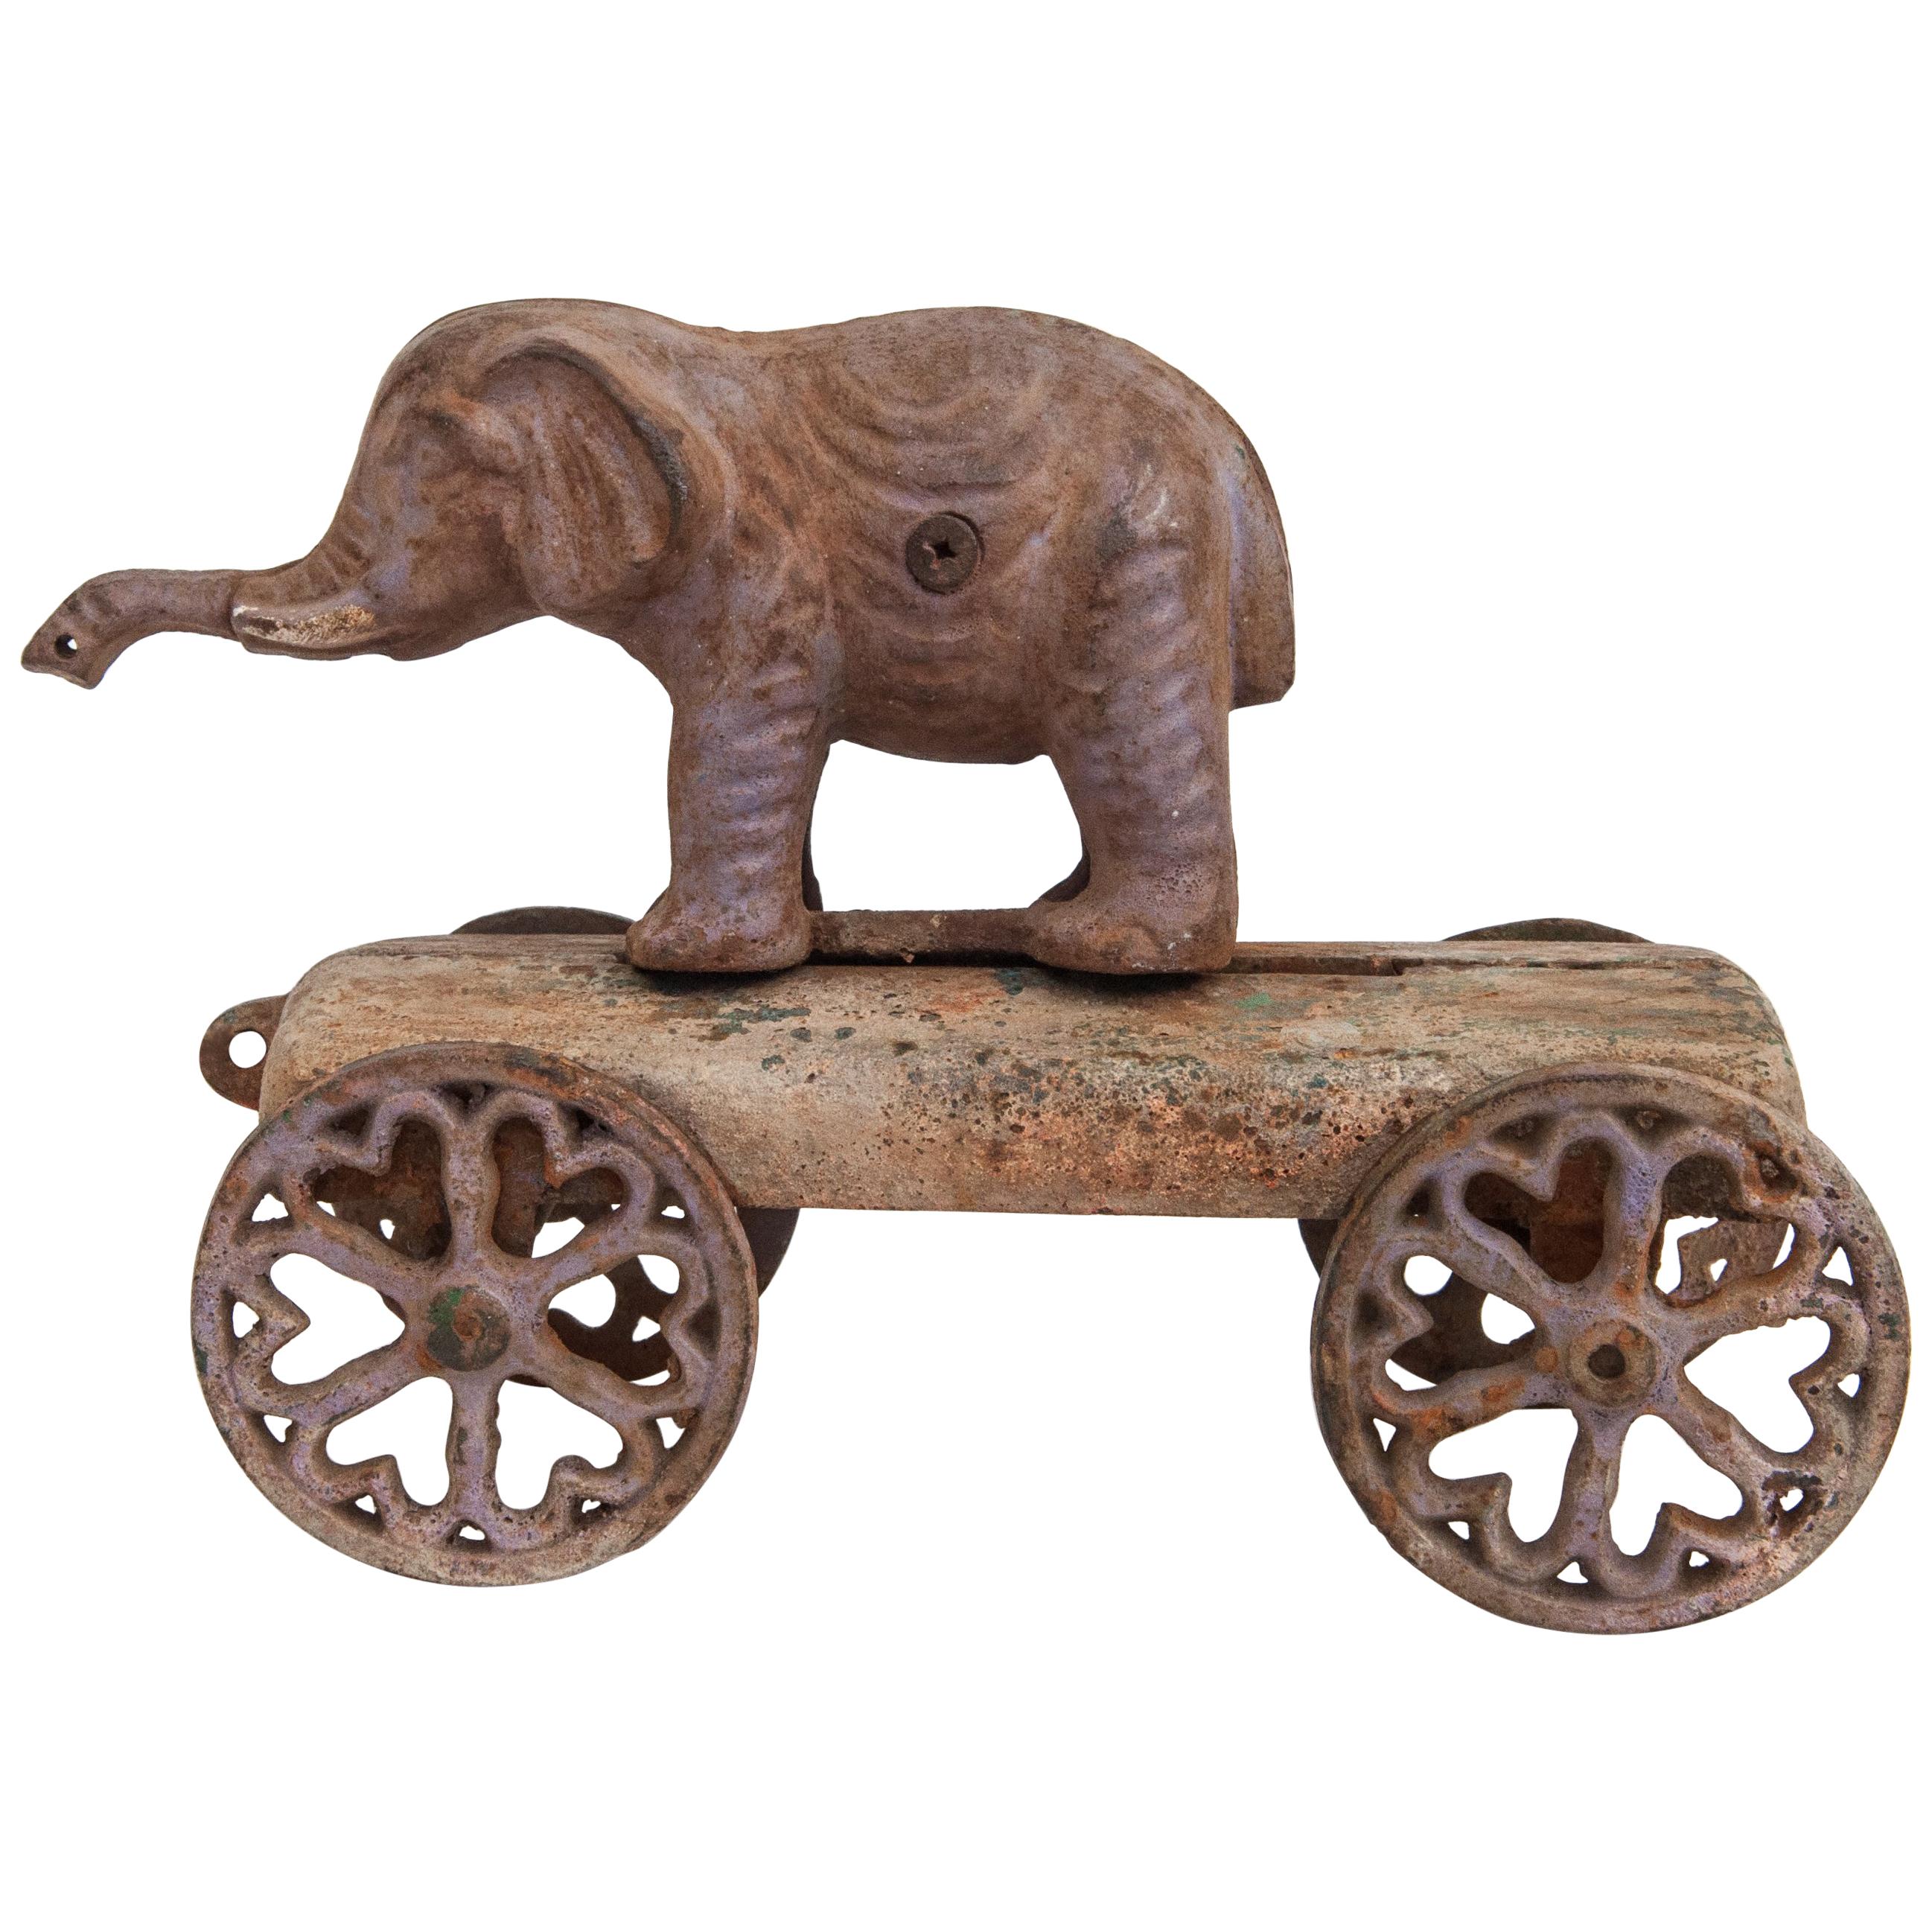 Vintage Elephant Pull Toy, Cast Iron, USA, Early 20th Century